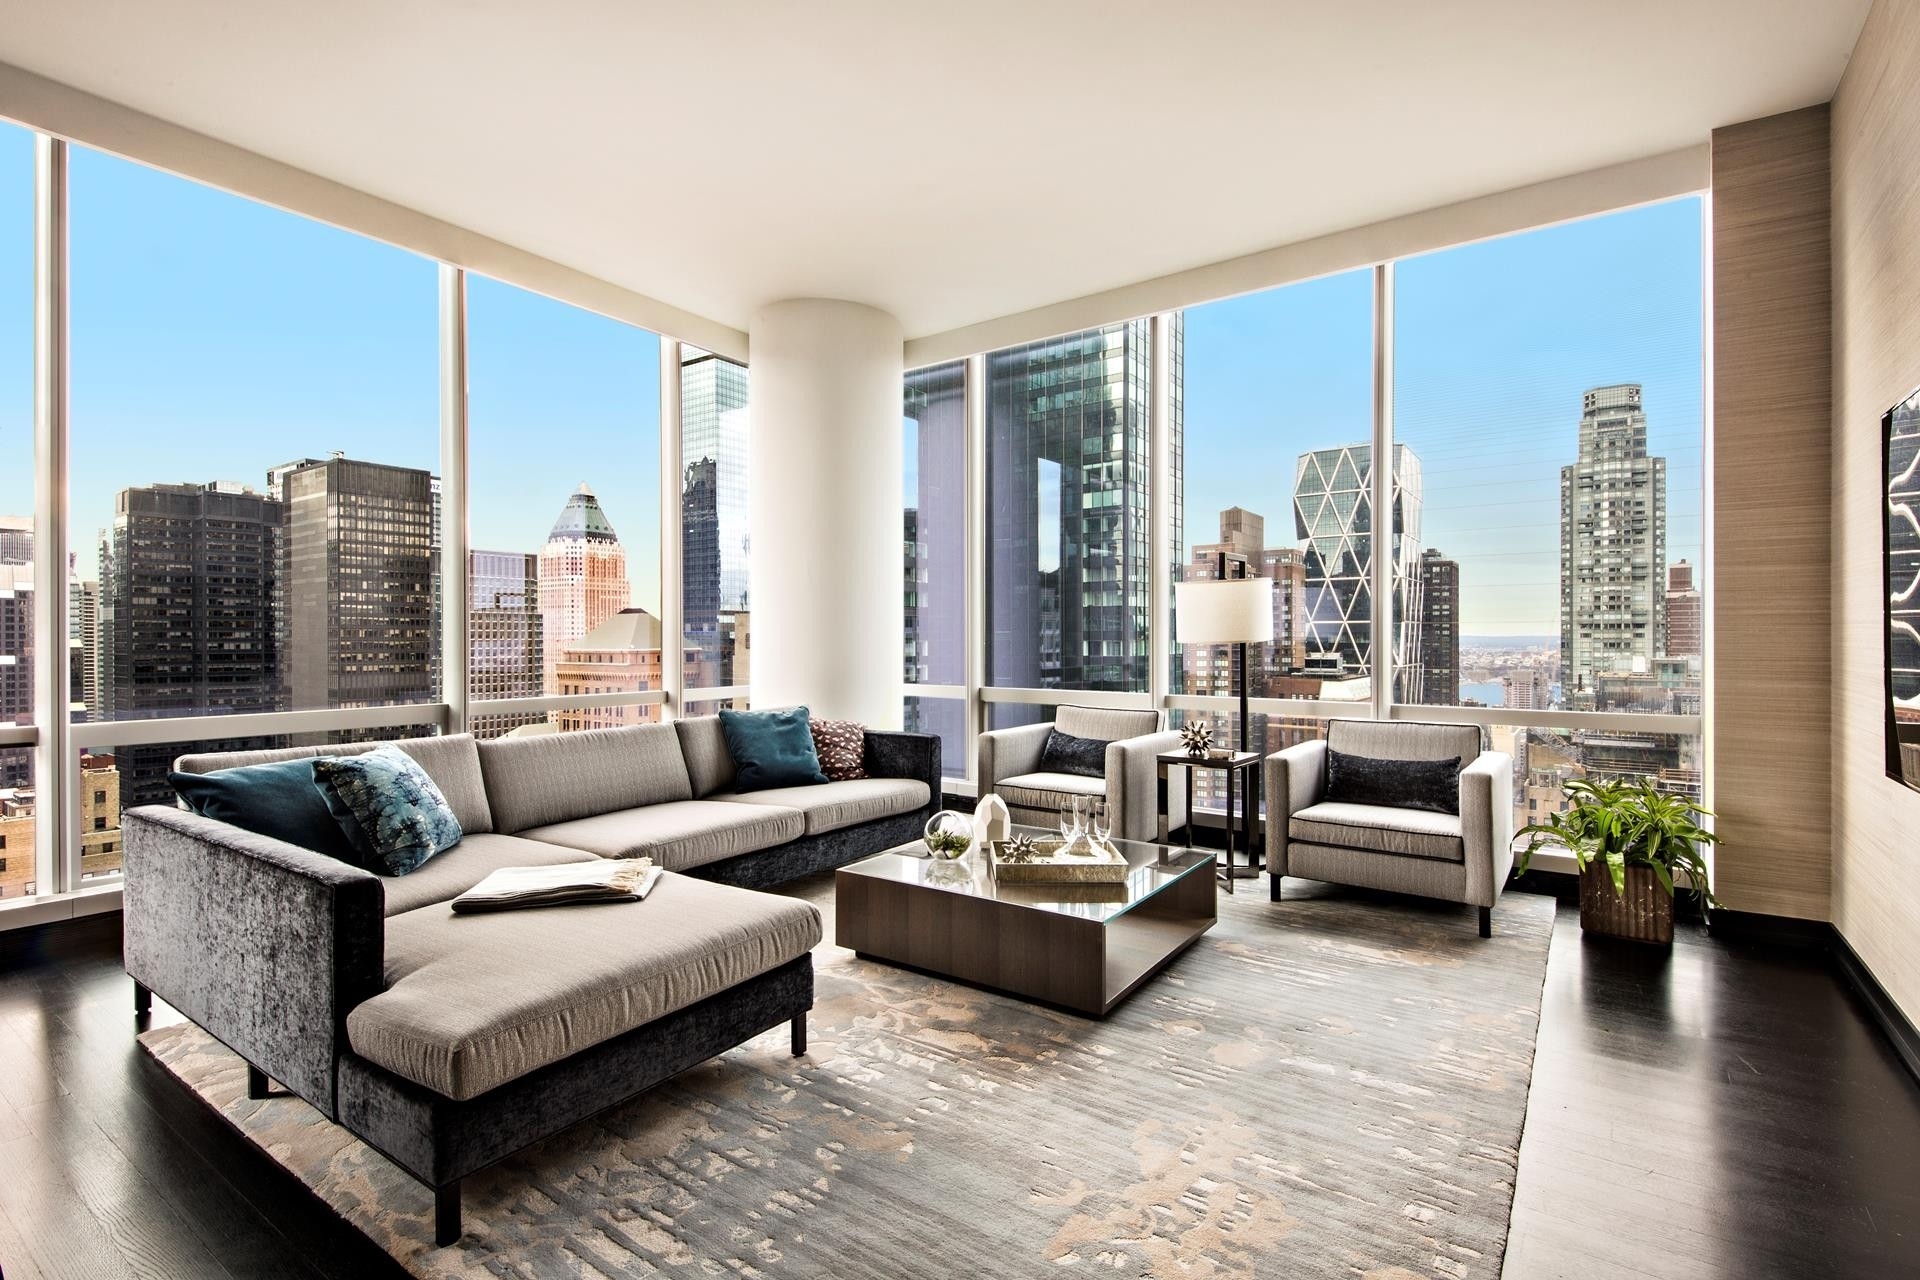 Condominium for Sale at One57, 157 W 57TH ST , 38C Midtown West, New York, NY 10019